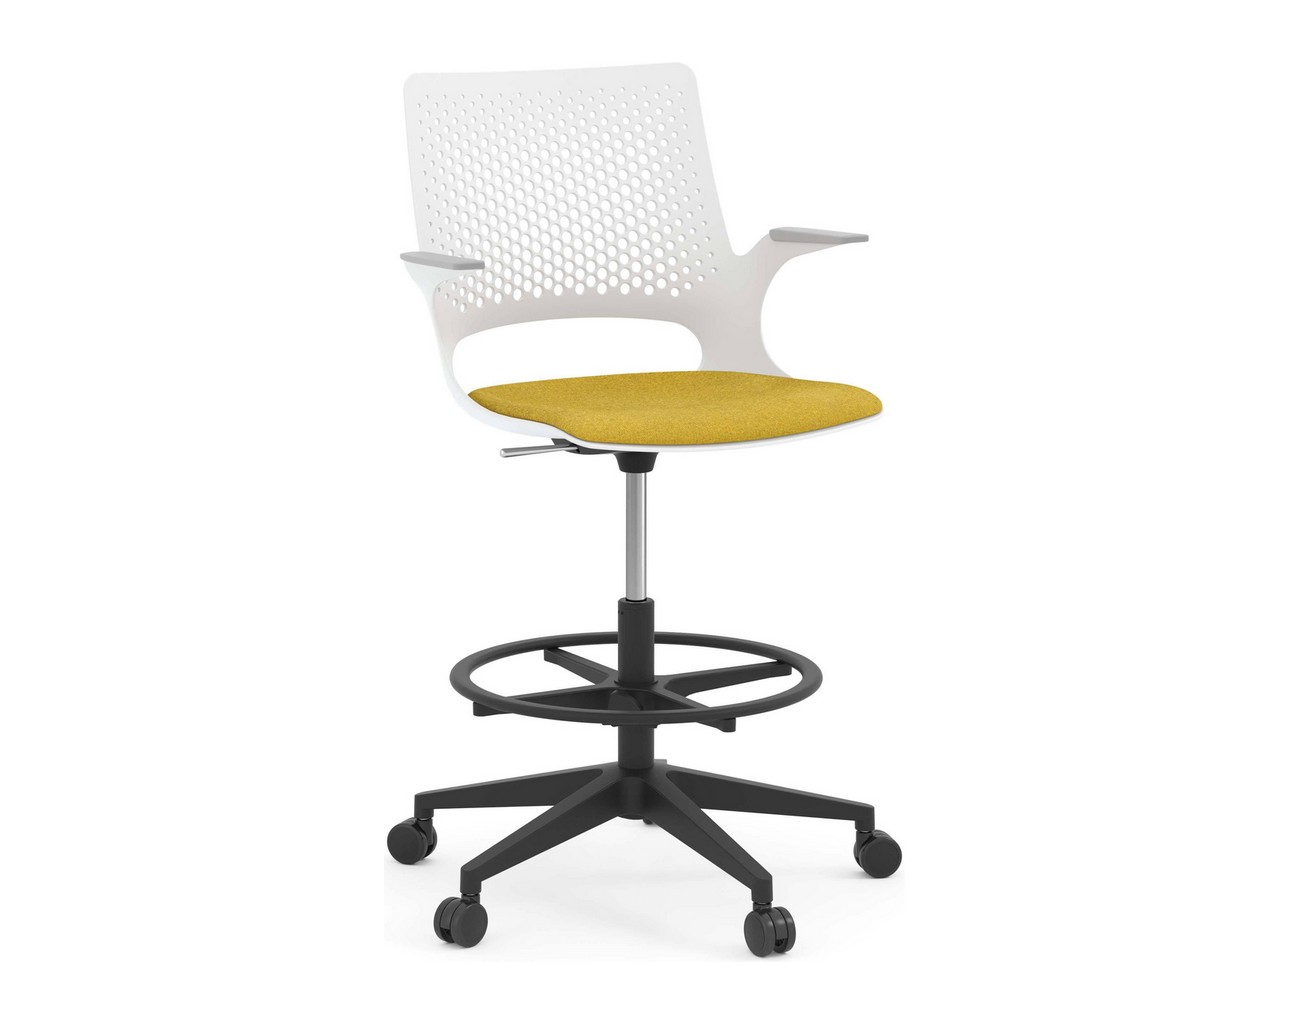 Harmony Drafting Chair – White Frame with Mustard Seat